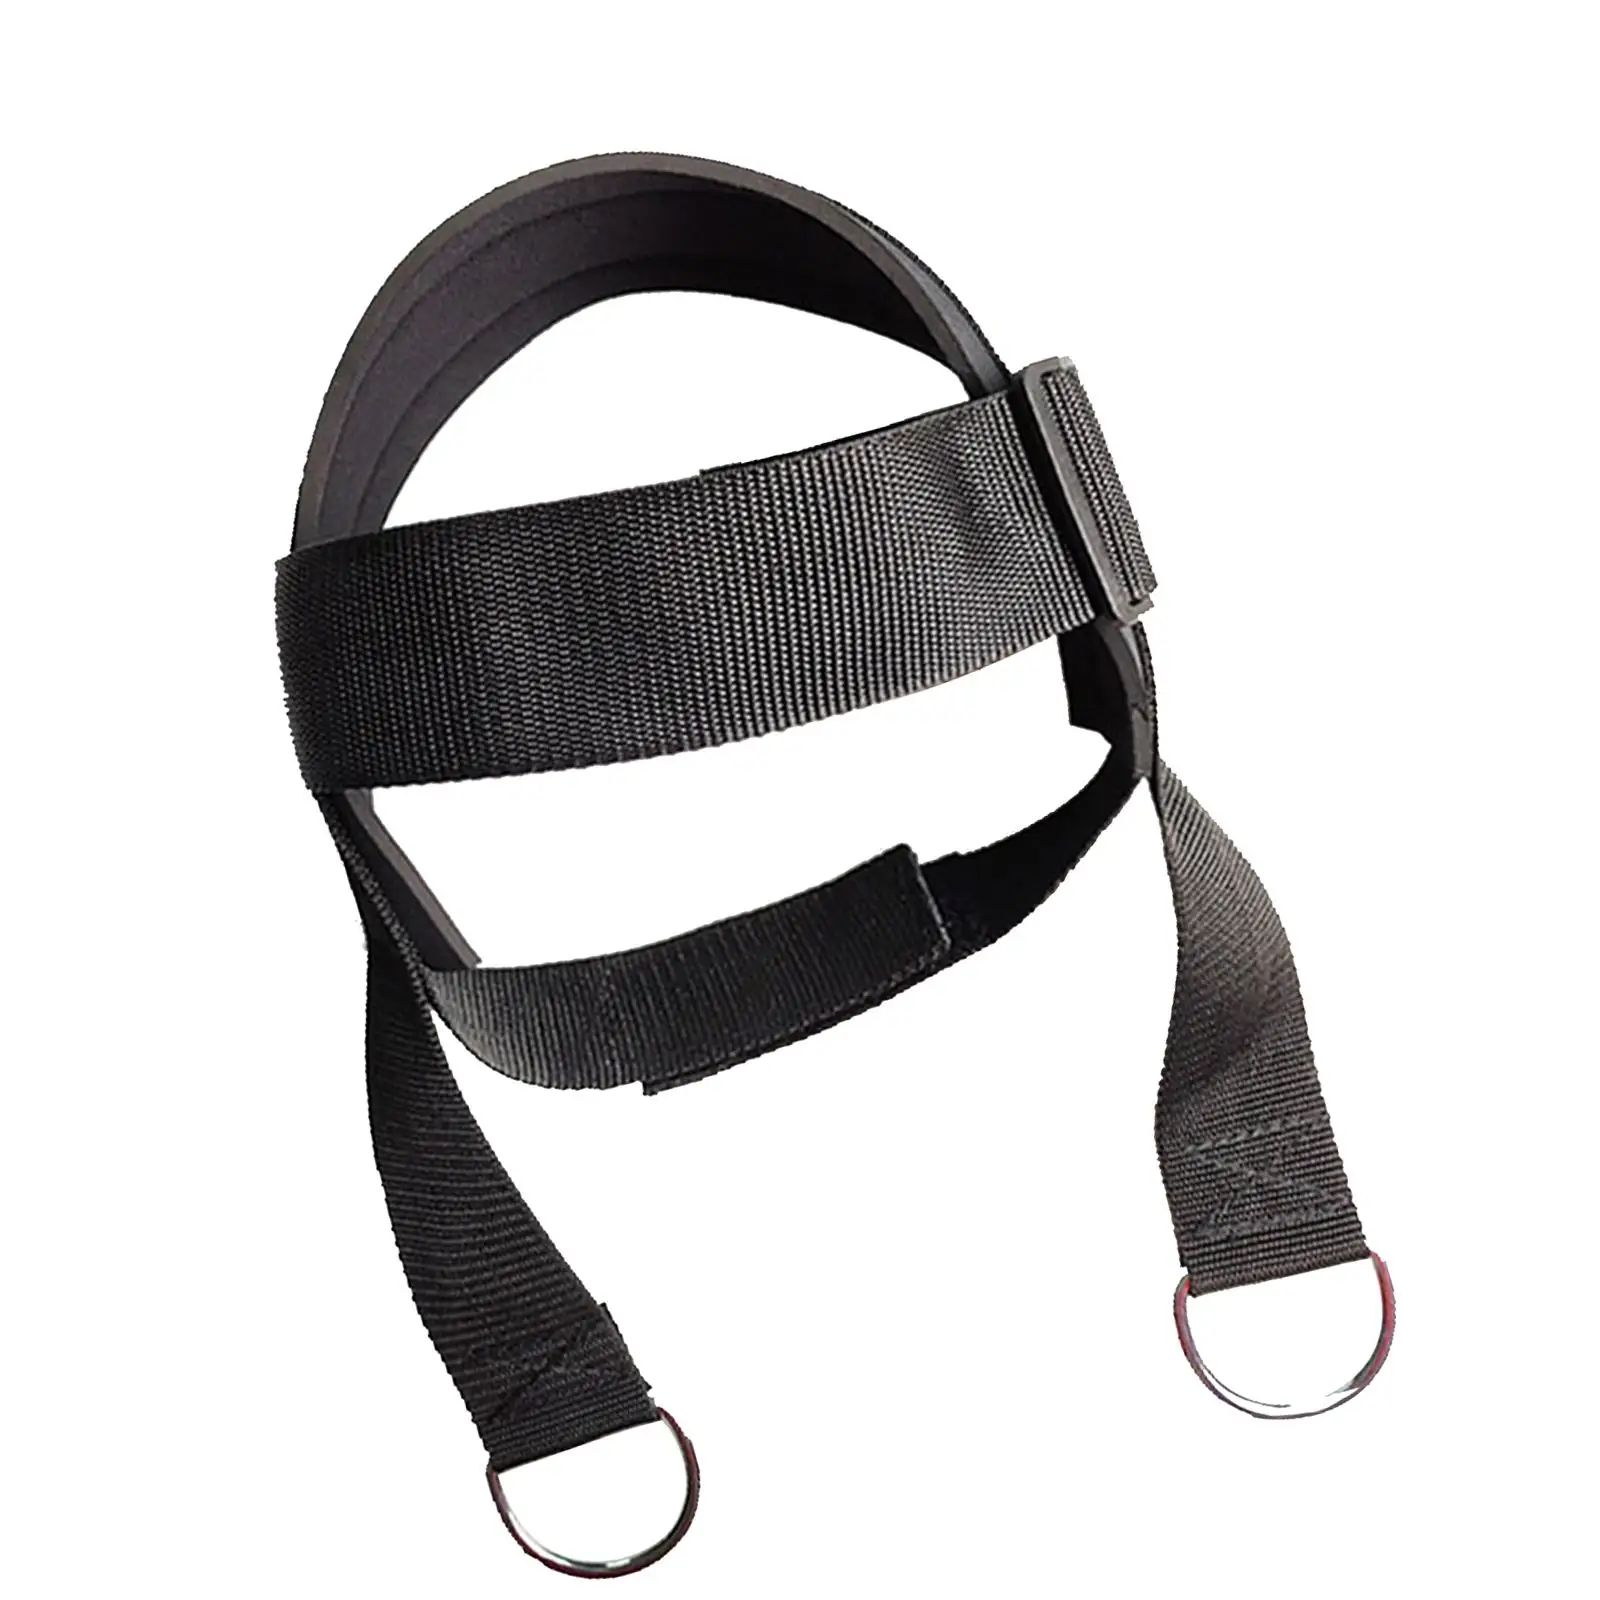 Weight Lifting Muscle Building Exerciser Straps Workout Head Neck Harness